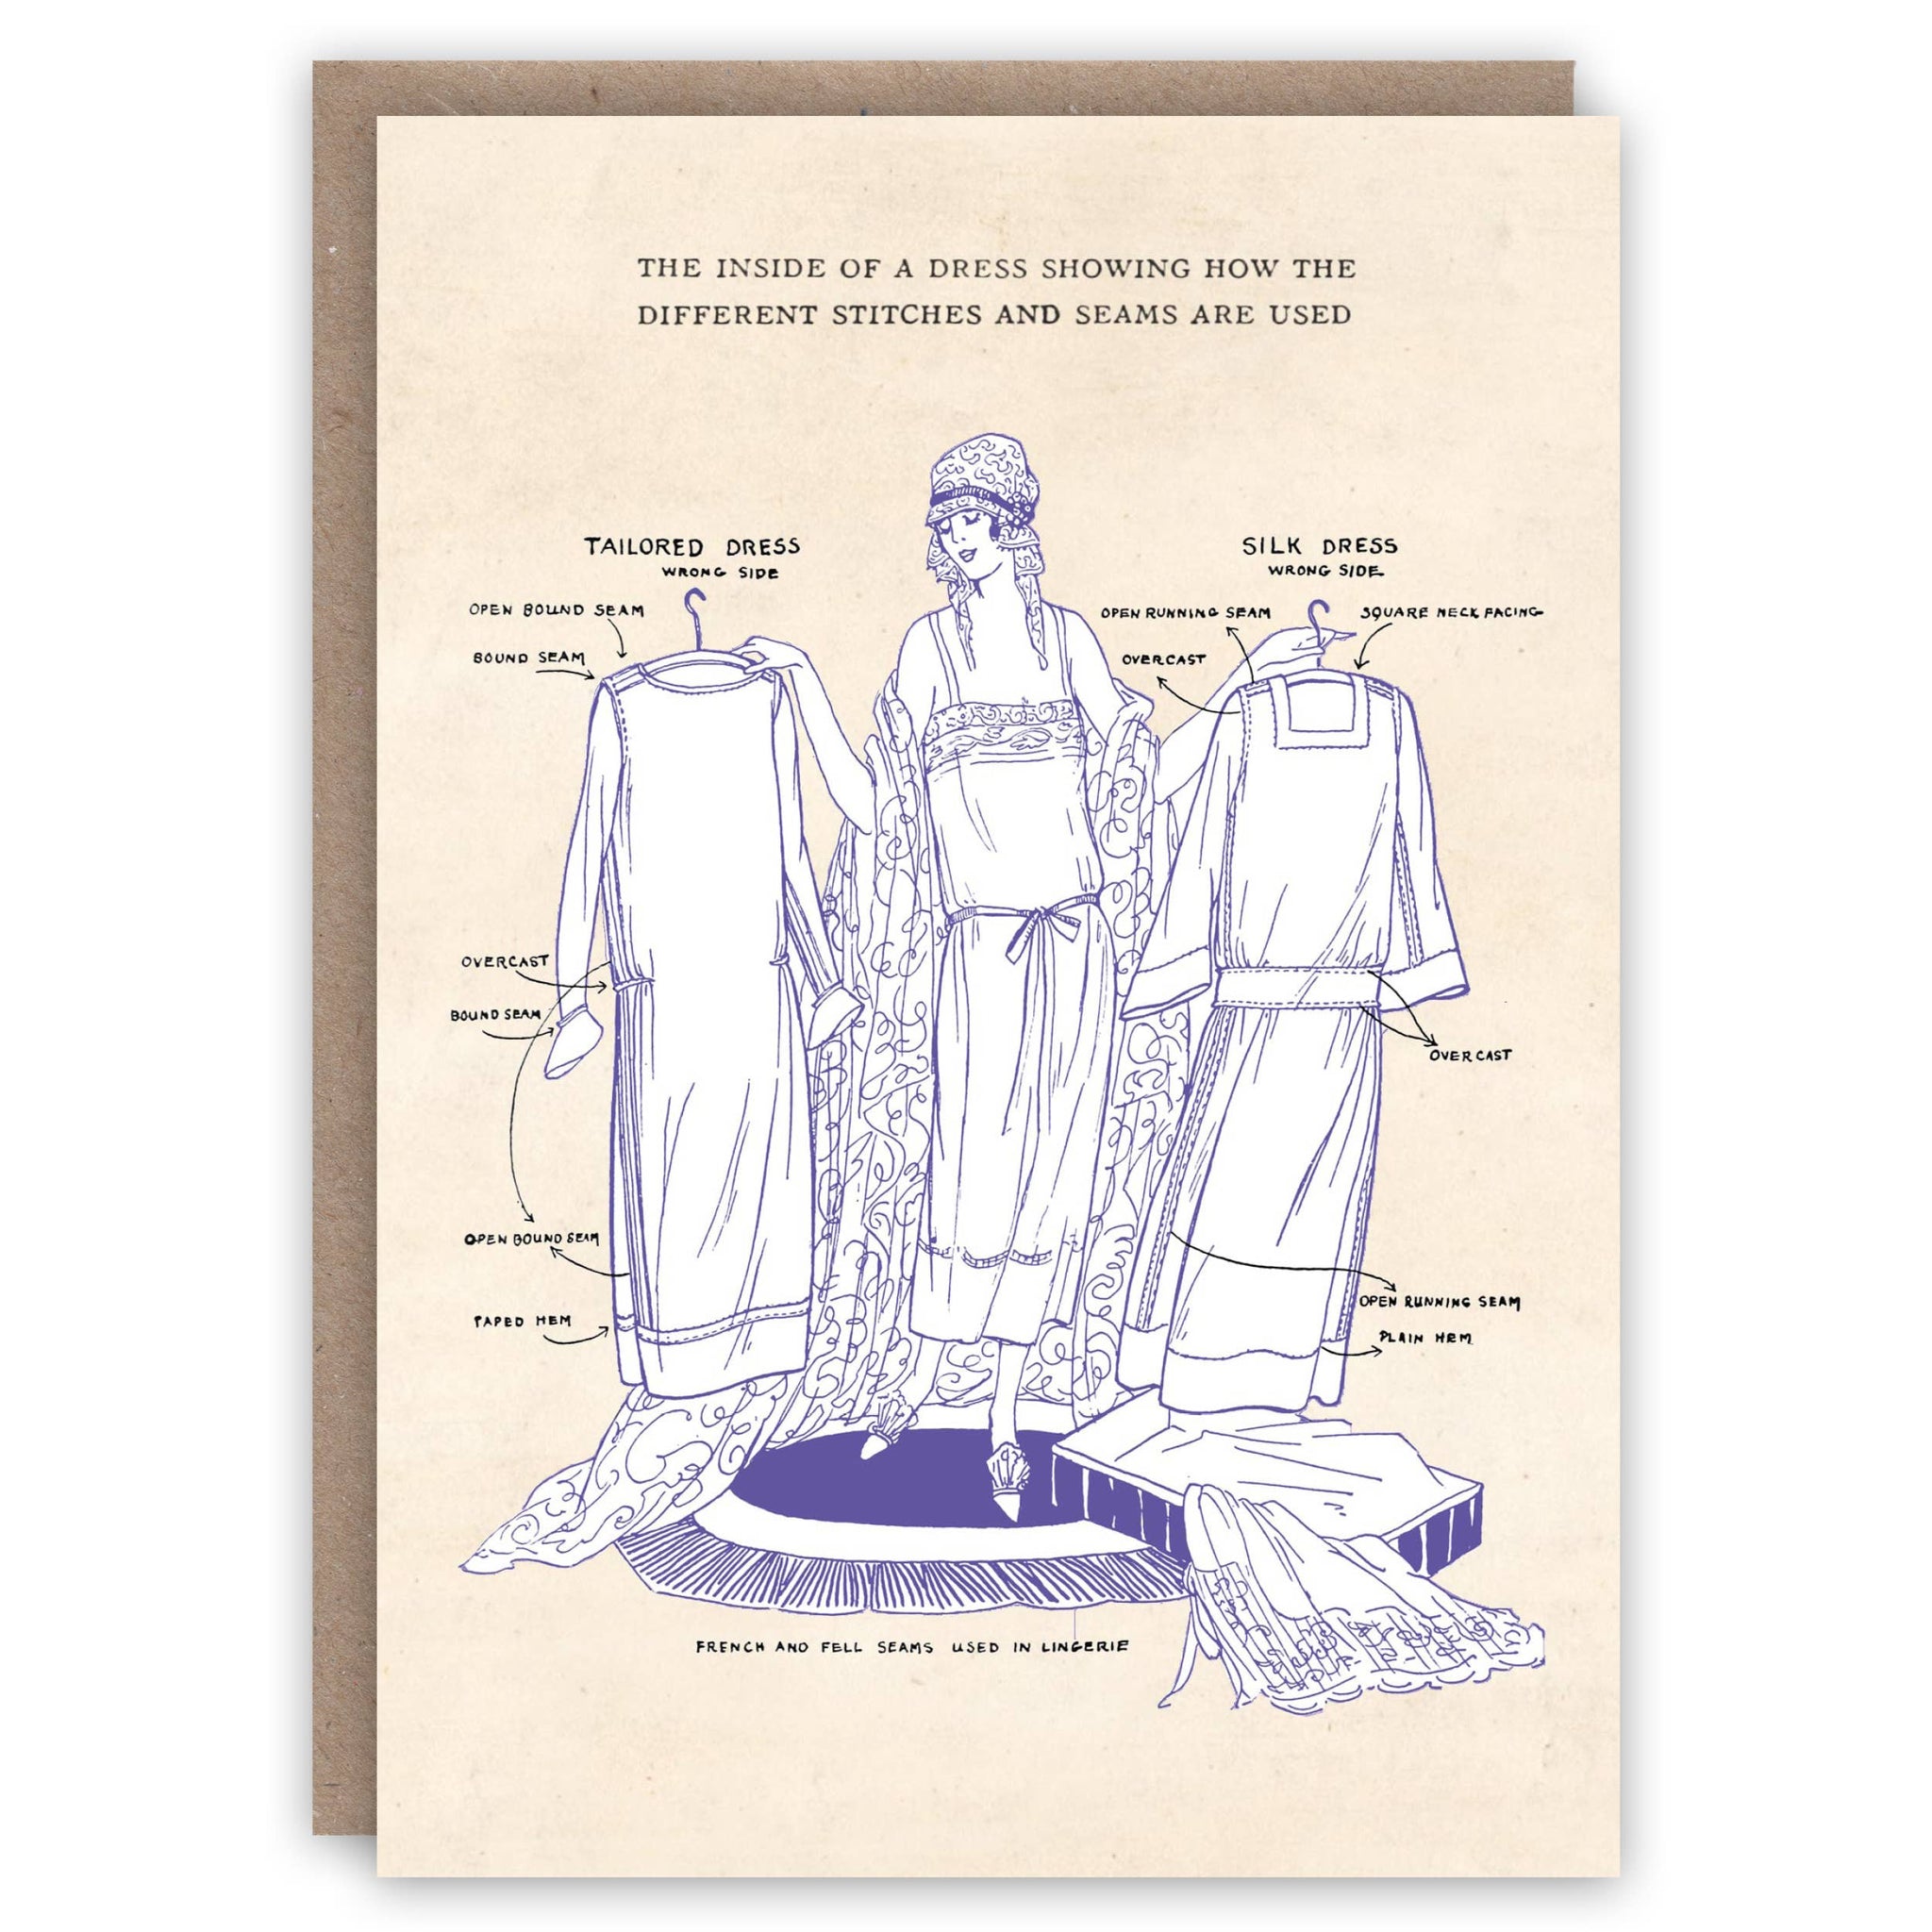 The Pattern Book : Greeting Card - The Inside of a Dress